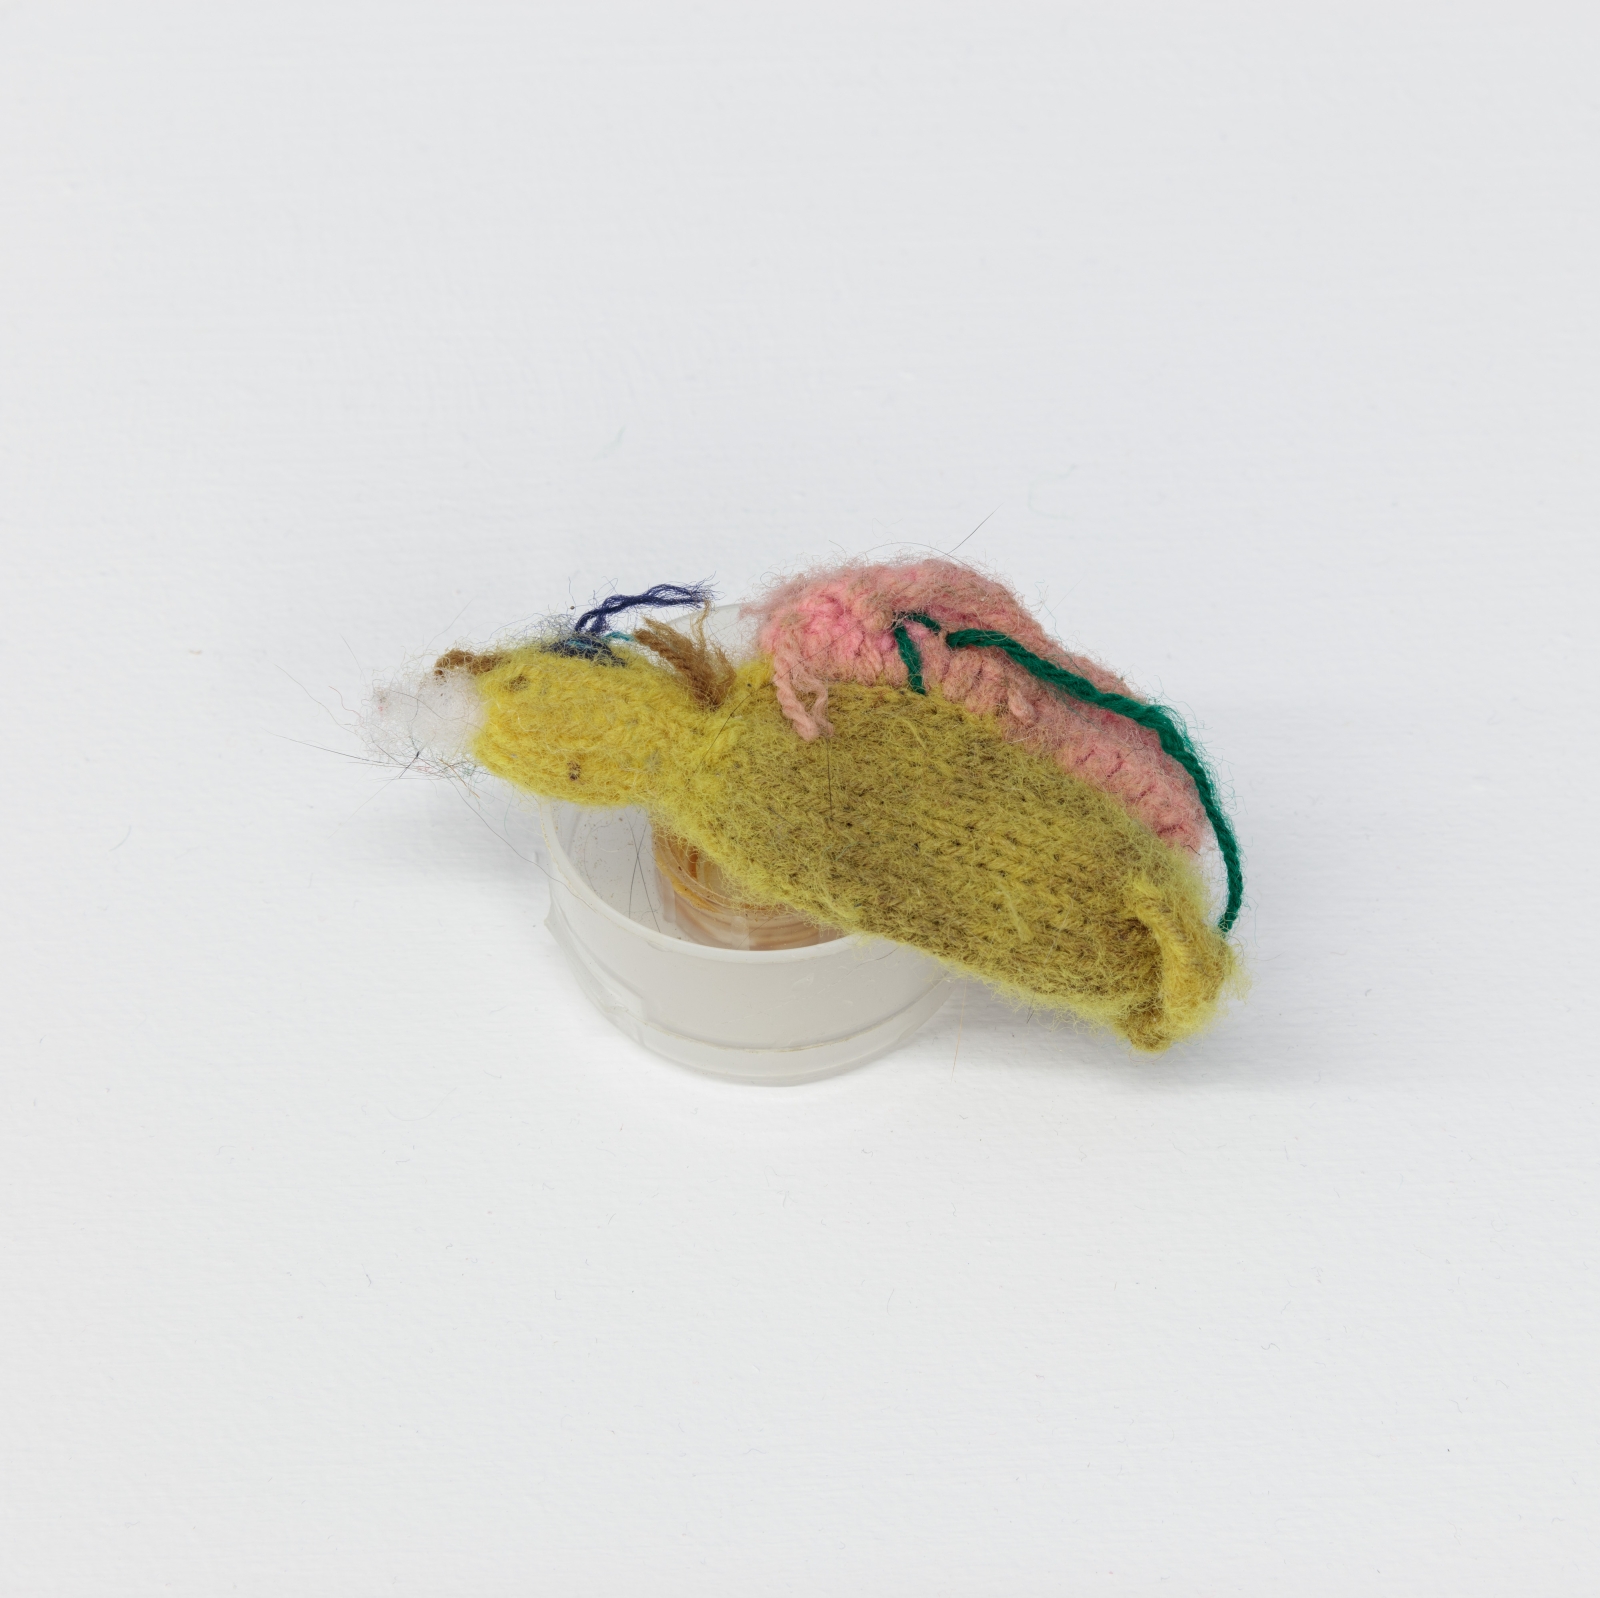 Carolee Schneemann
Assemblage; slippers with toy mouse, 2015
bottle cap with toy and wire
3 x 4 ins.
7.6 x 10.2 cm